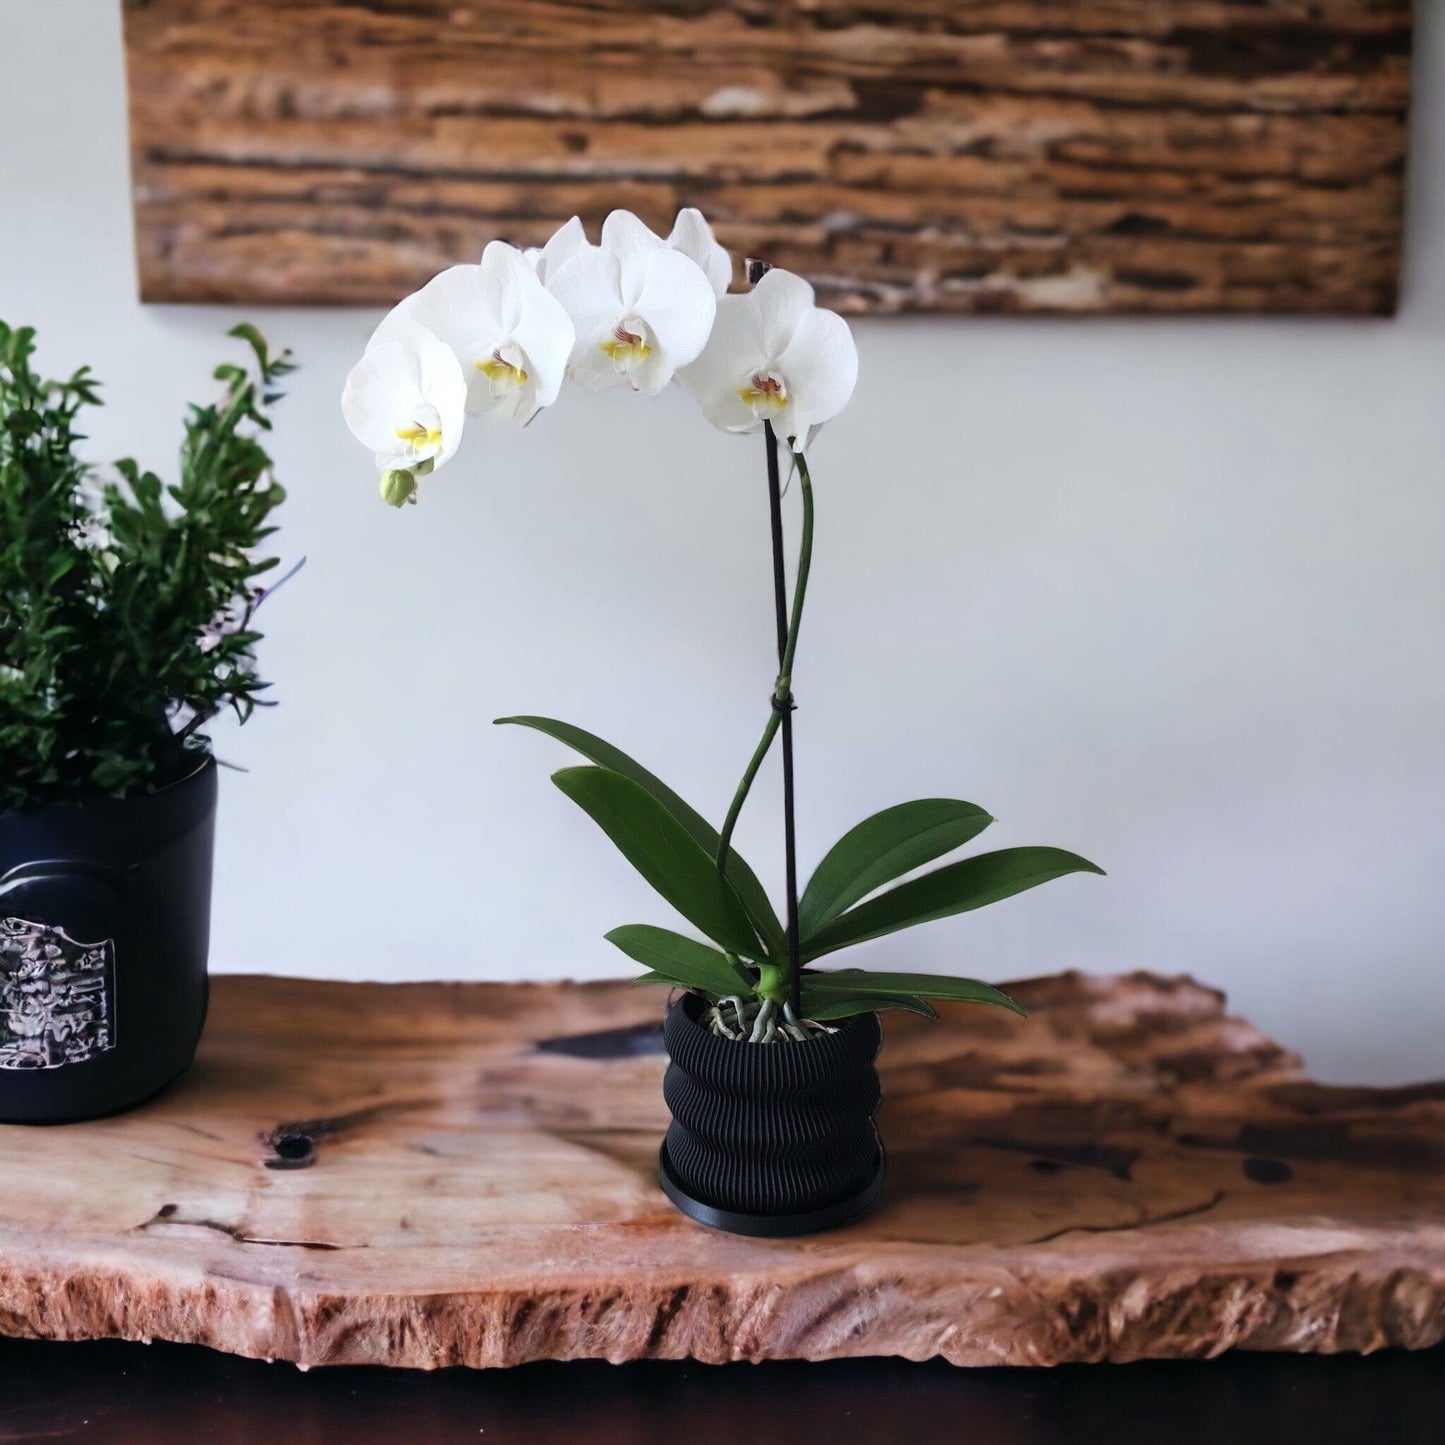 LOCALLY GROWN WHITE PHALEONOPSIS ORCHID IN BLACK 3D PRINTED ECO PLANTER - 5.5" x 24"